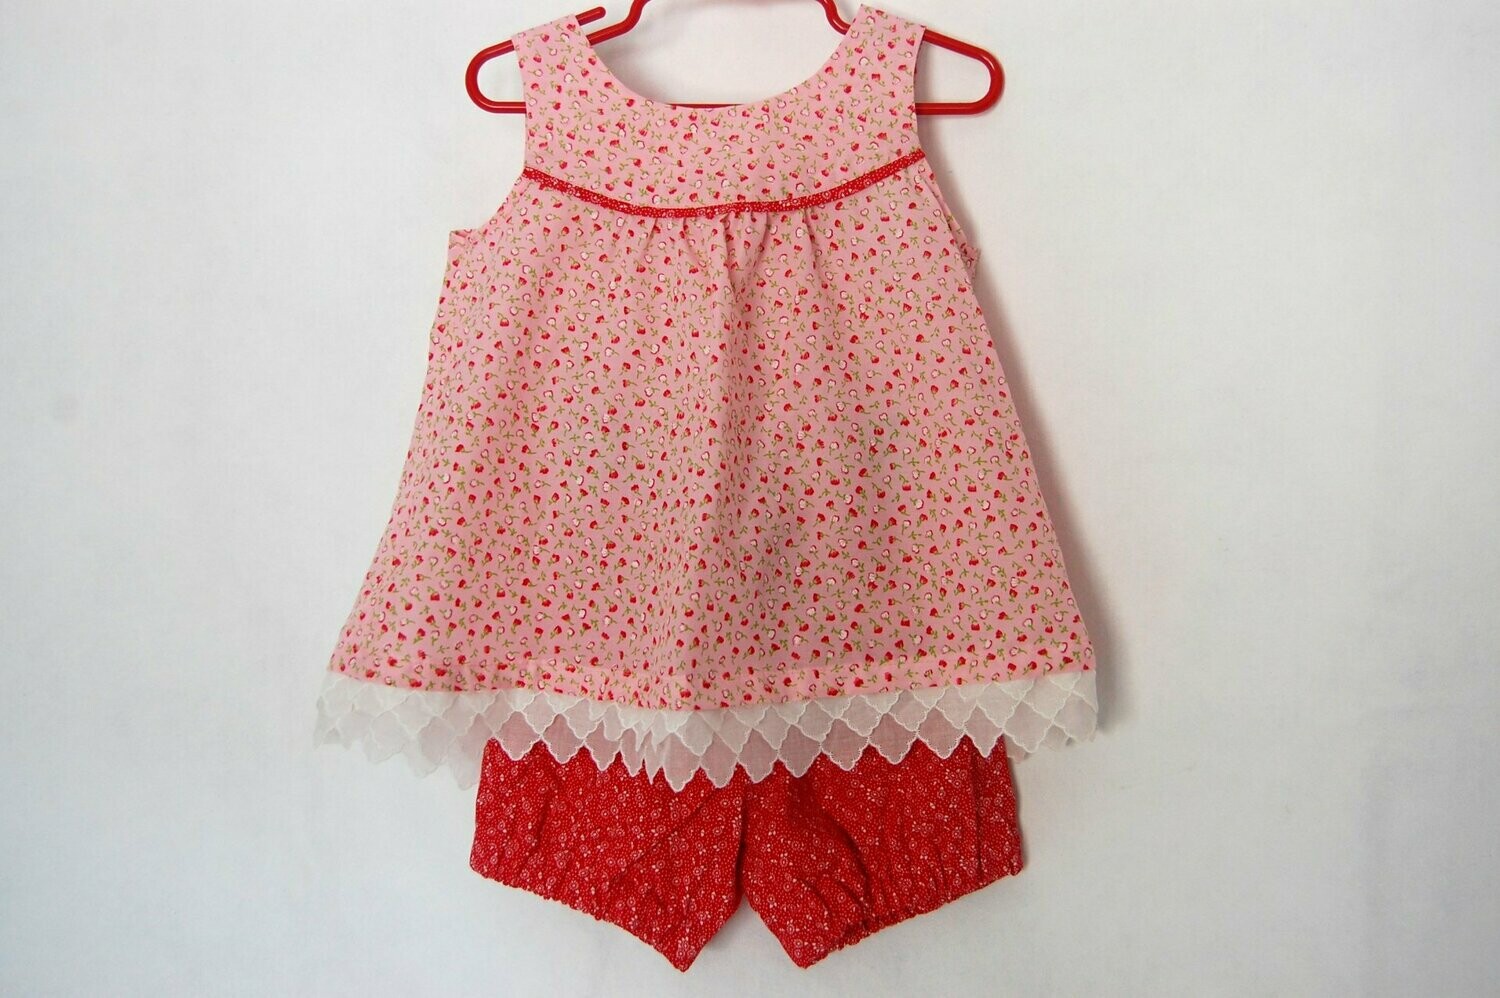 Handcrafted Little Flower Top & one Red Pants - for Girls 3 (three) YEARS